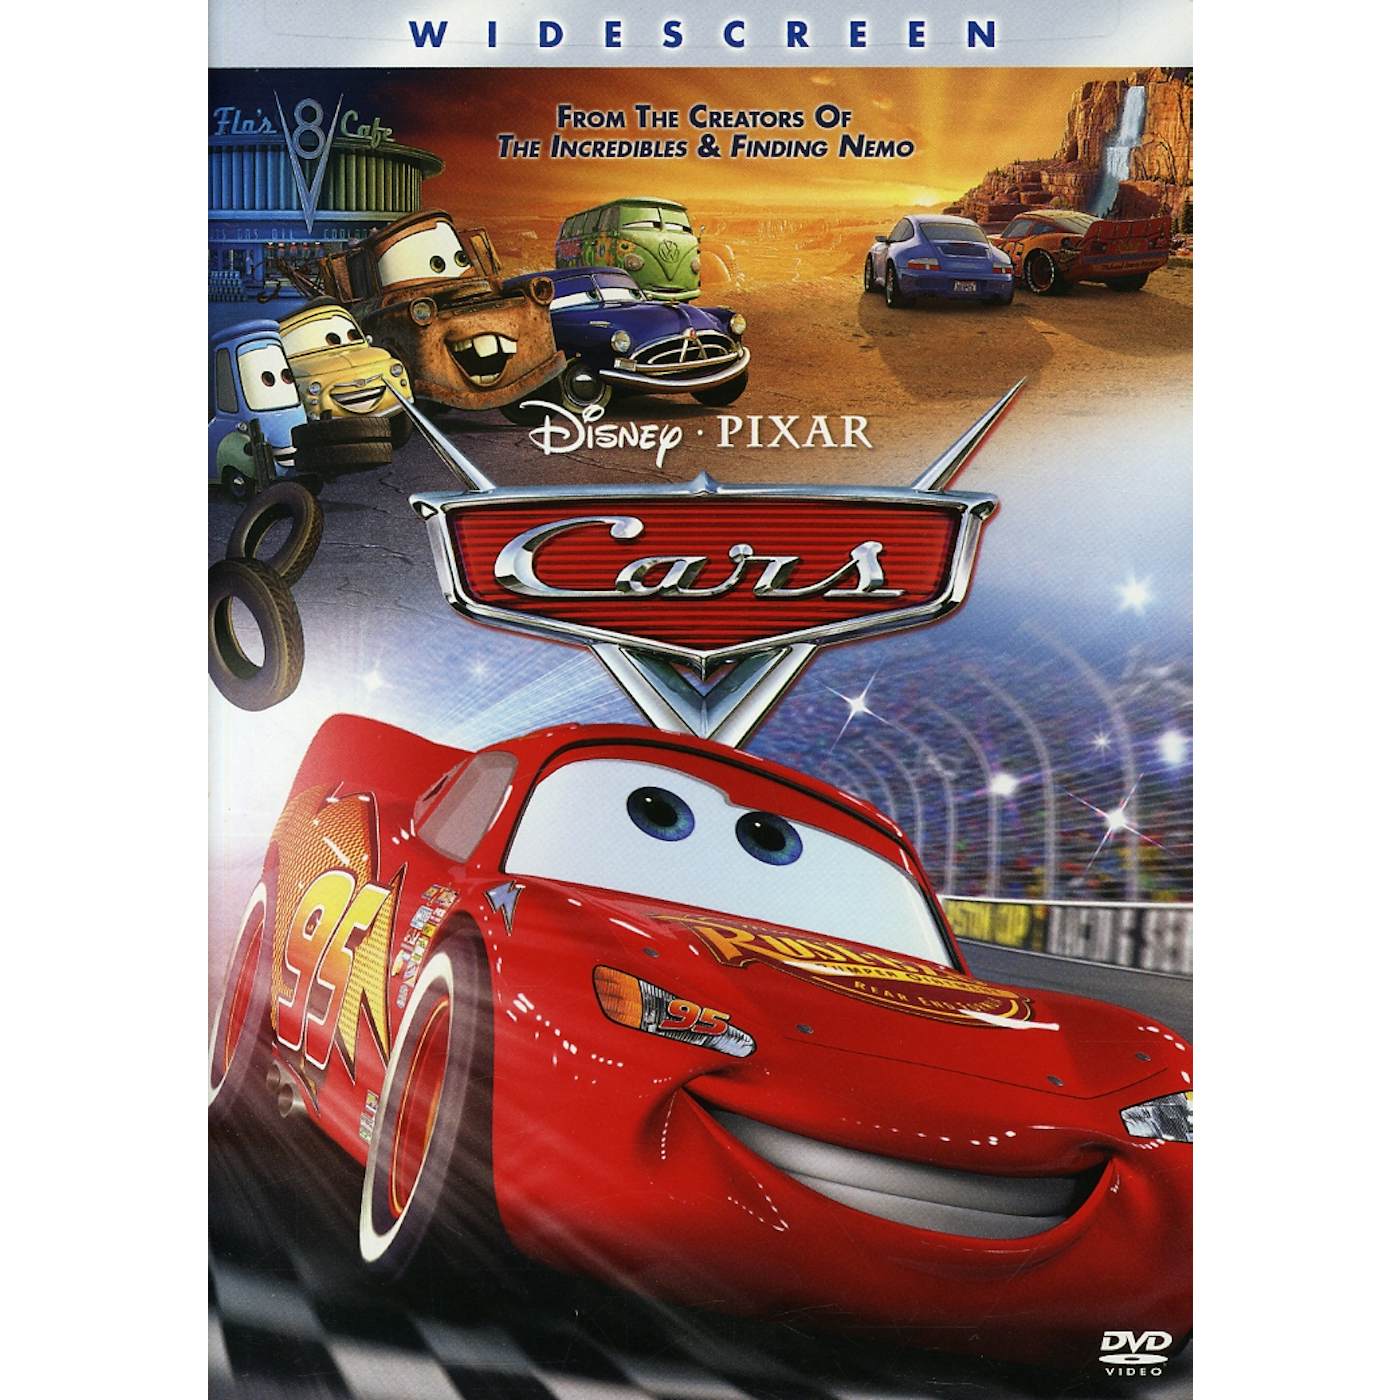 The Cars DVD